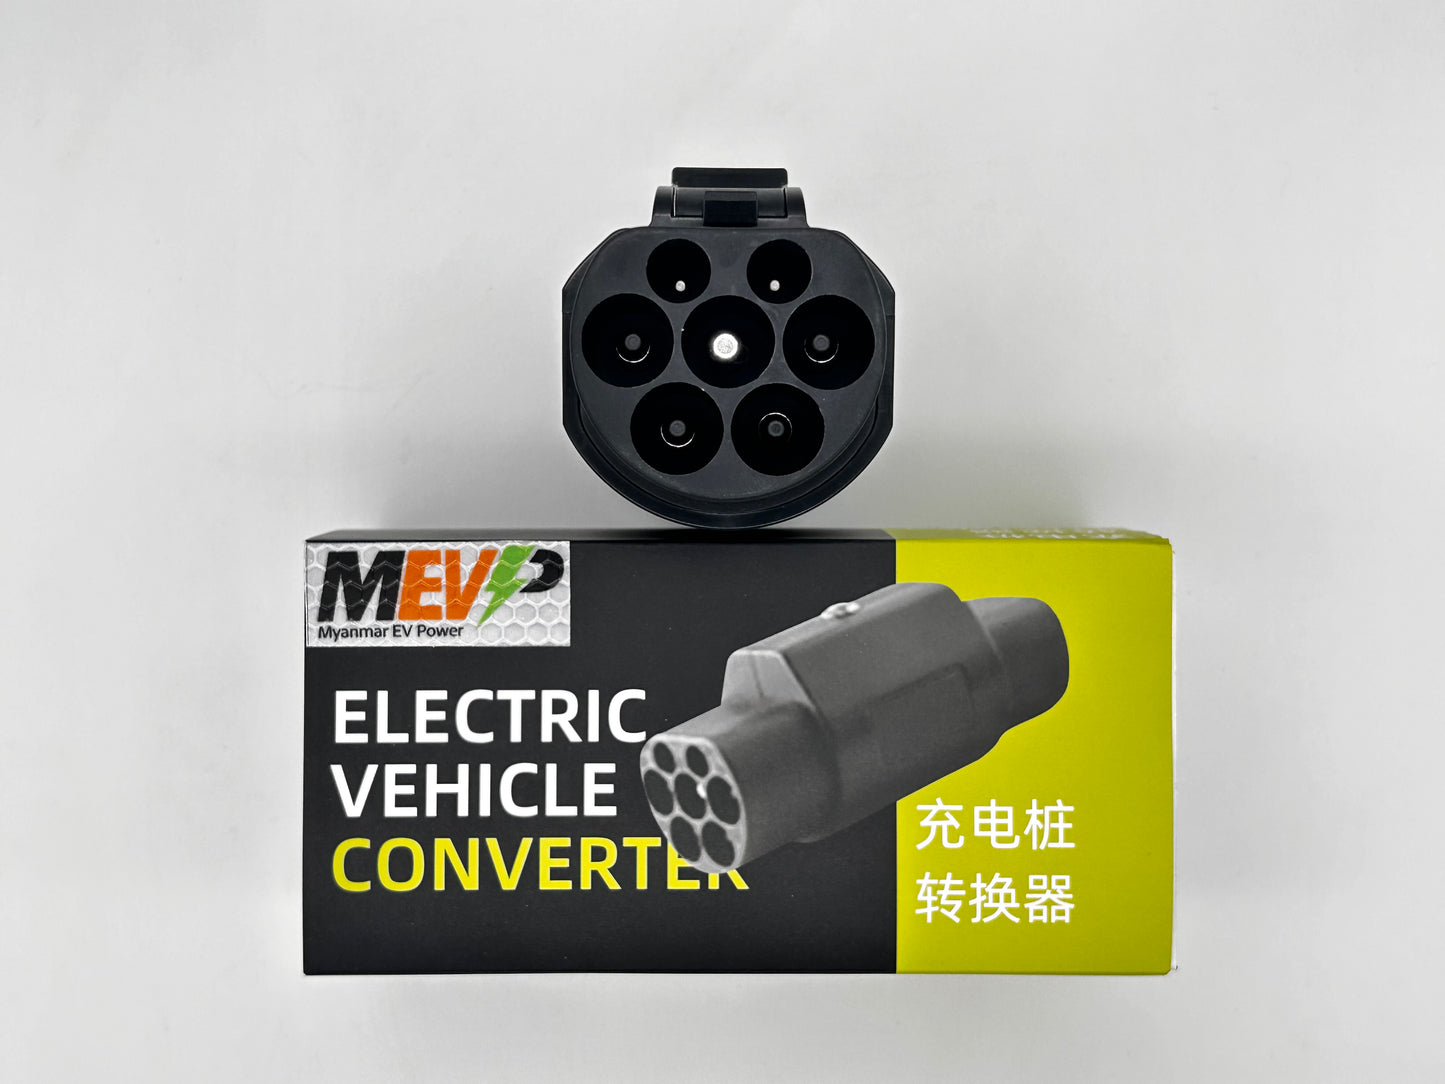 TYPE 2 TO GB/T (380V) EV ADAPTERS